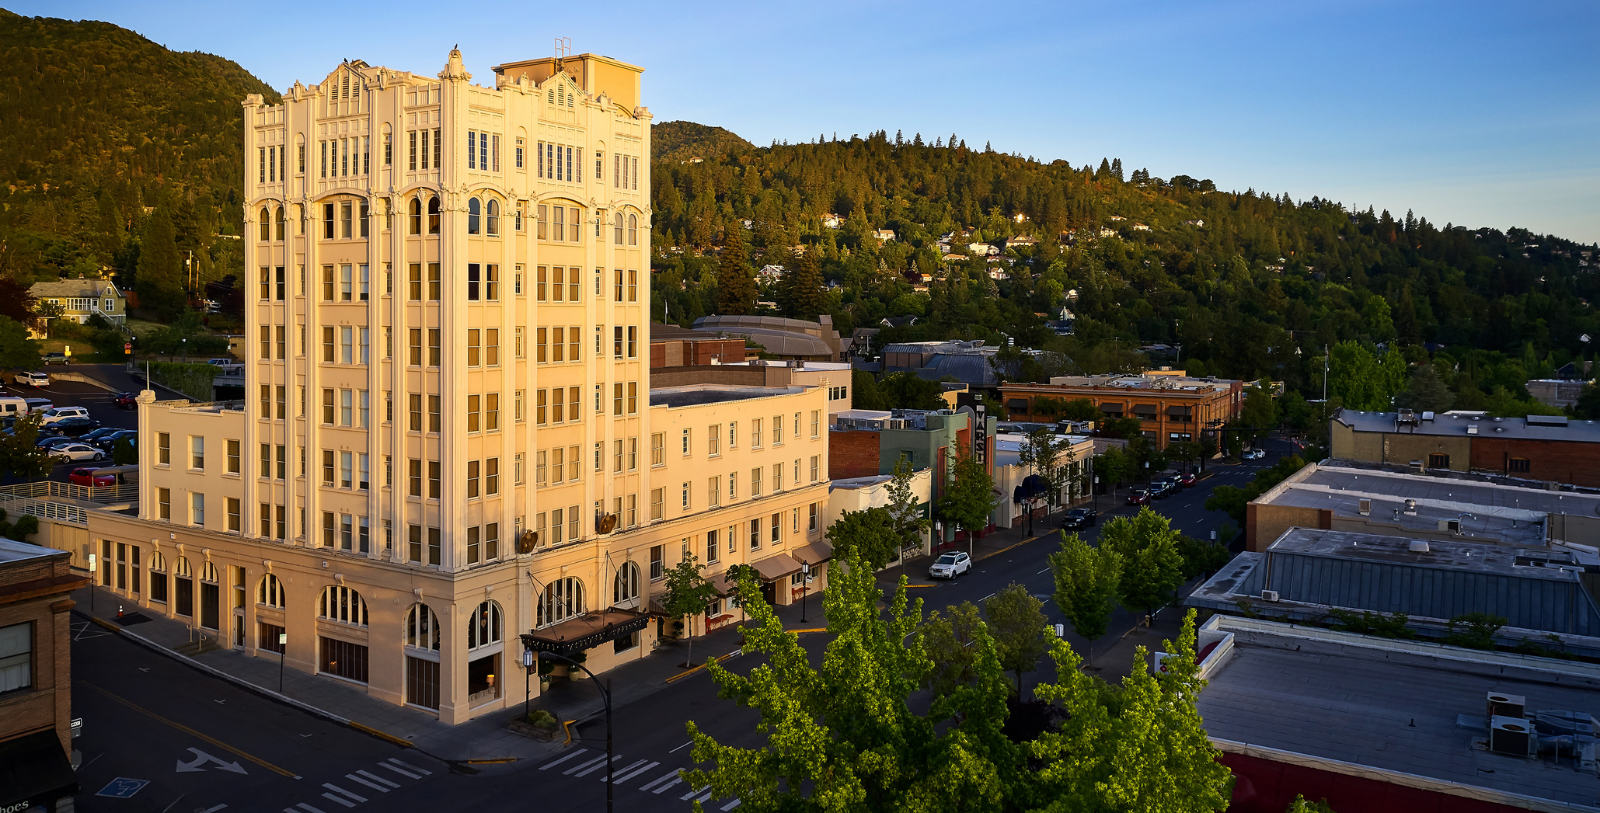 Image of Hotel Exterior at Ashland Springs Hotel, 1925, Member of Historic Hotels of America, in Ashland, Oregon, Overview